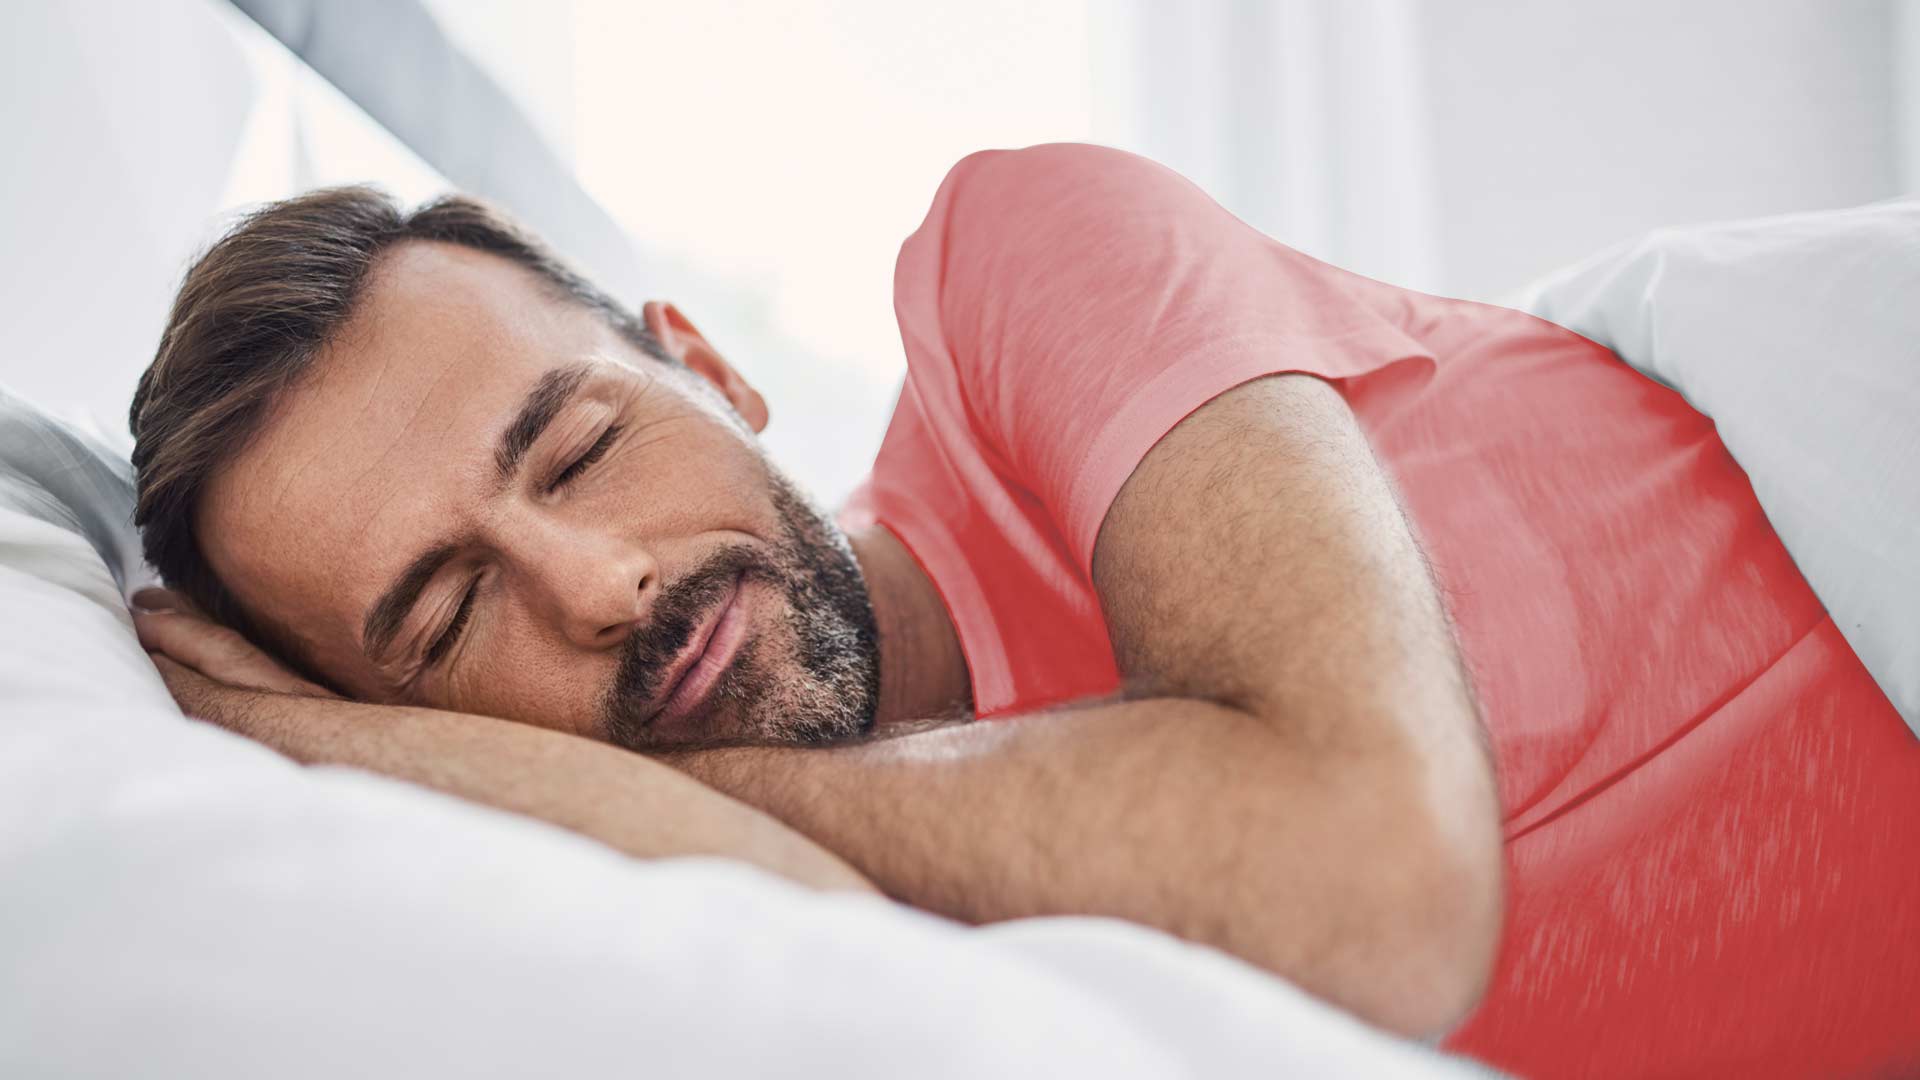 Middle Aged White Man Sleeping in Bed Peacfully with no Sleep or Sinus Issues